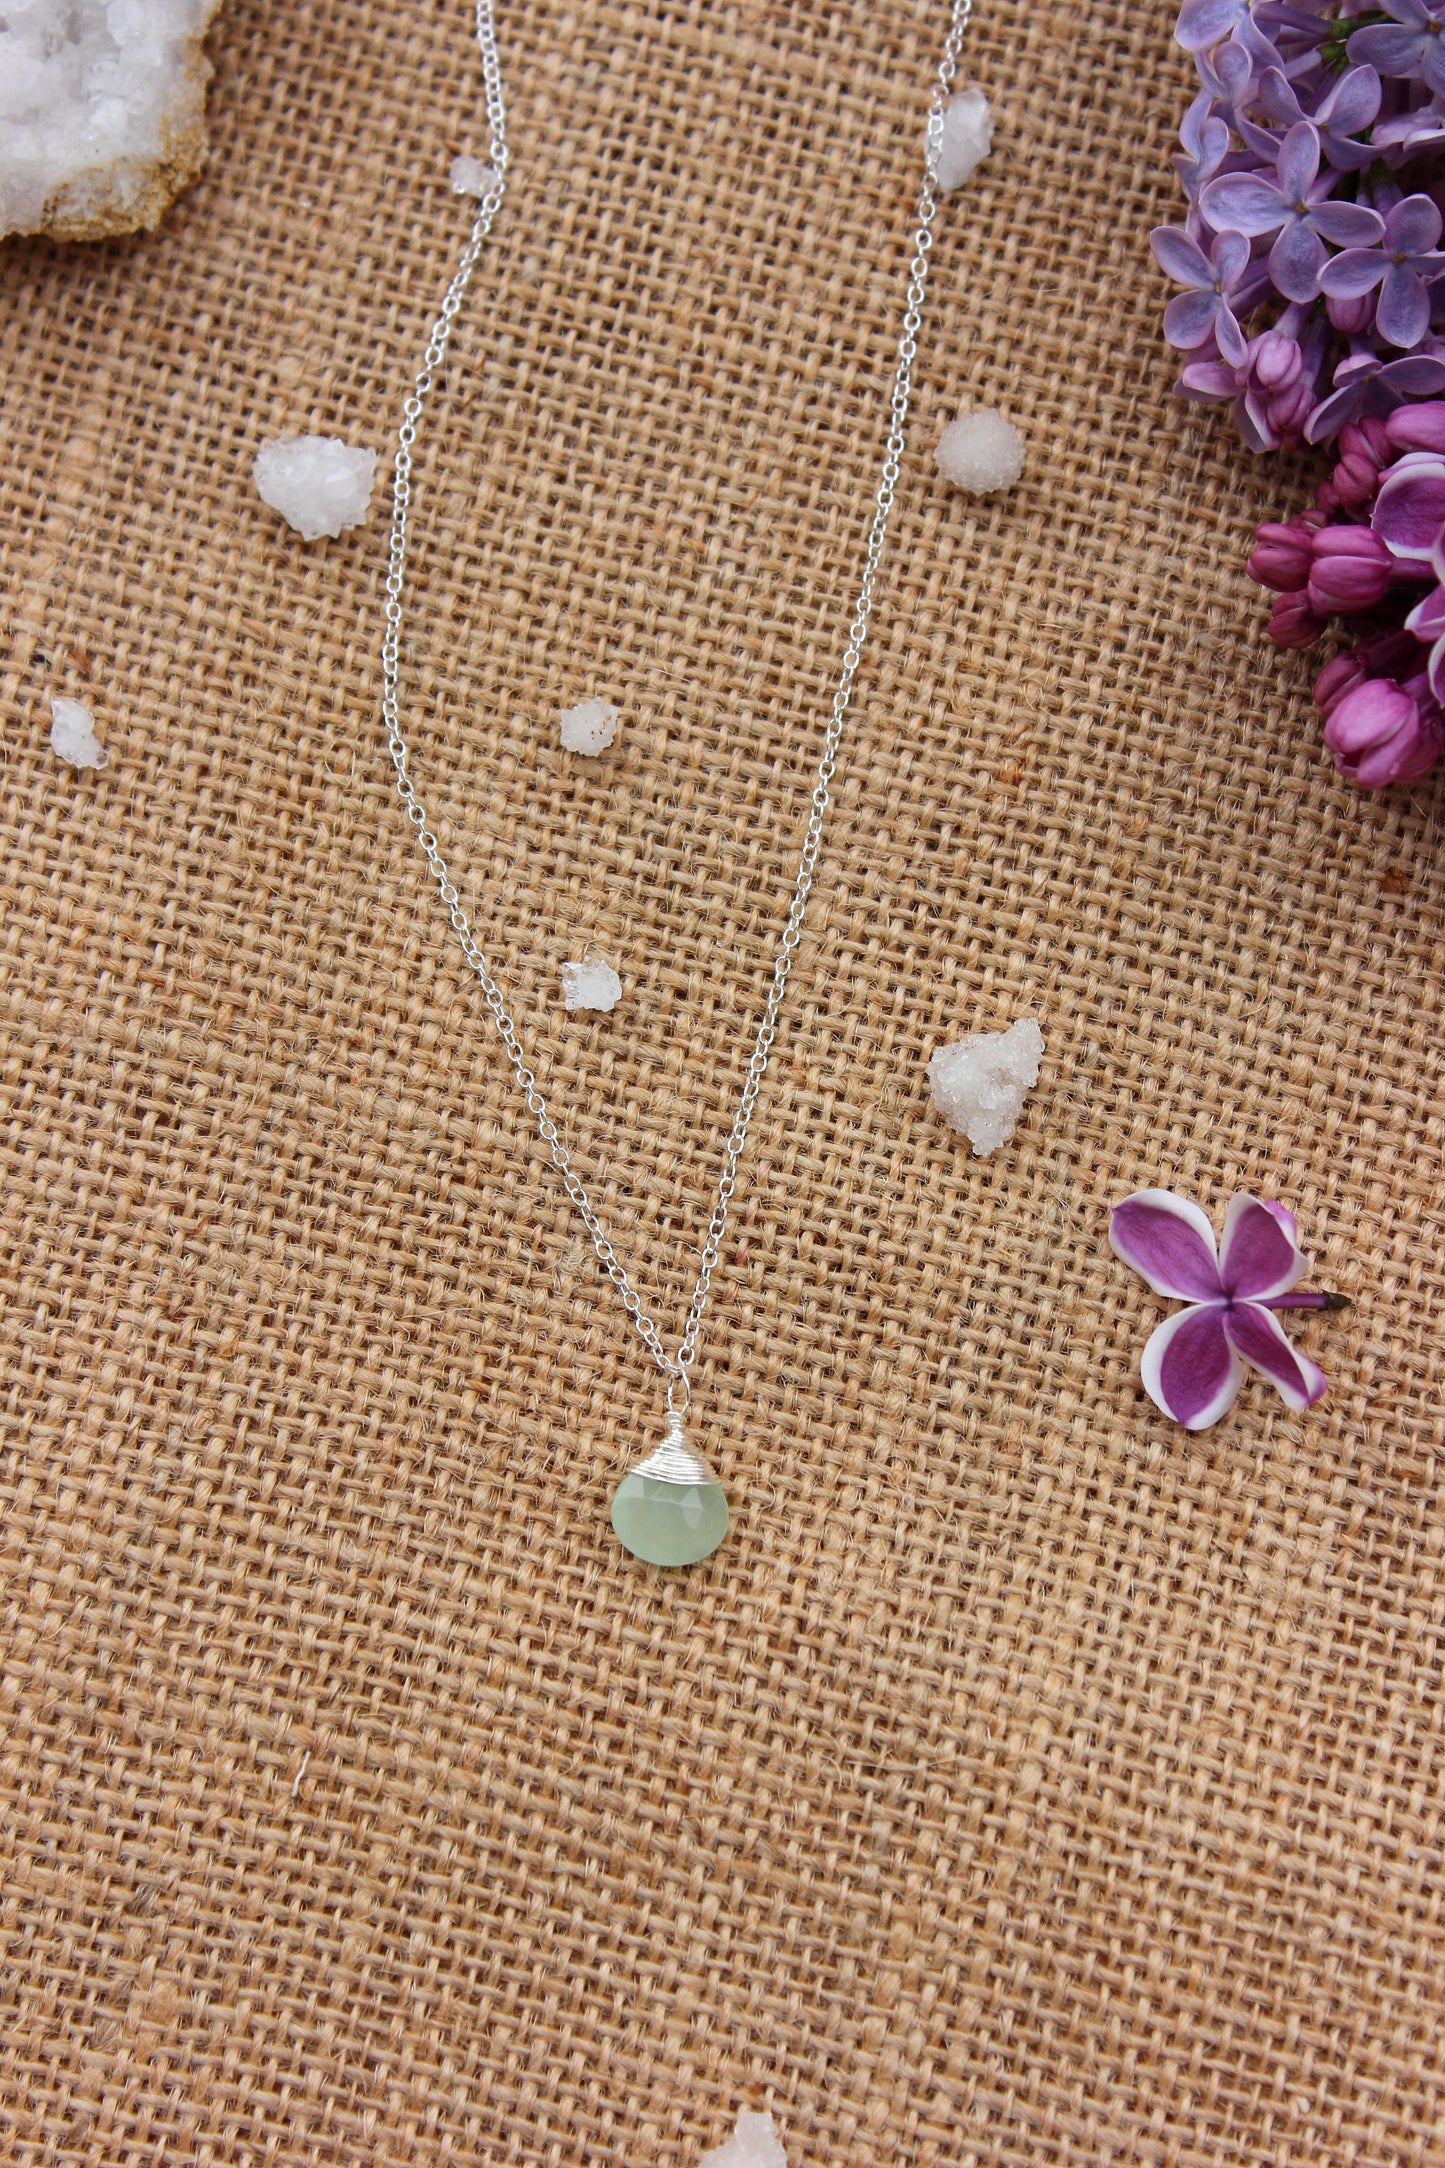 Green Chalcedony Briolette Necklace